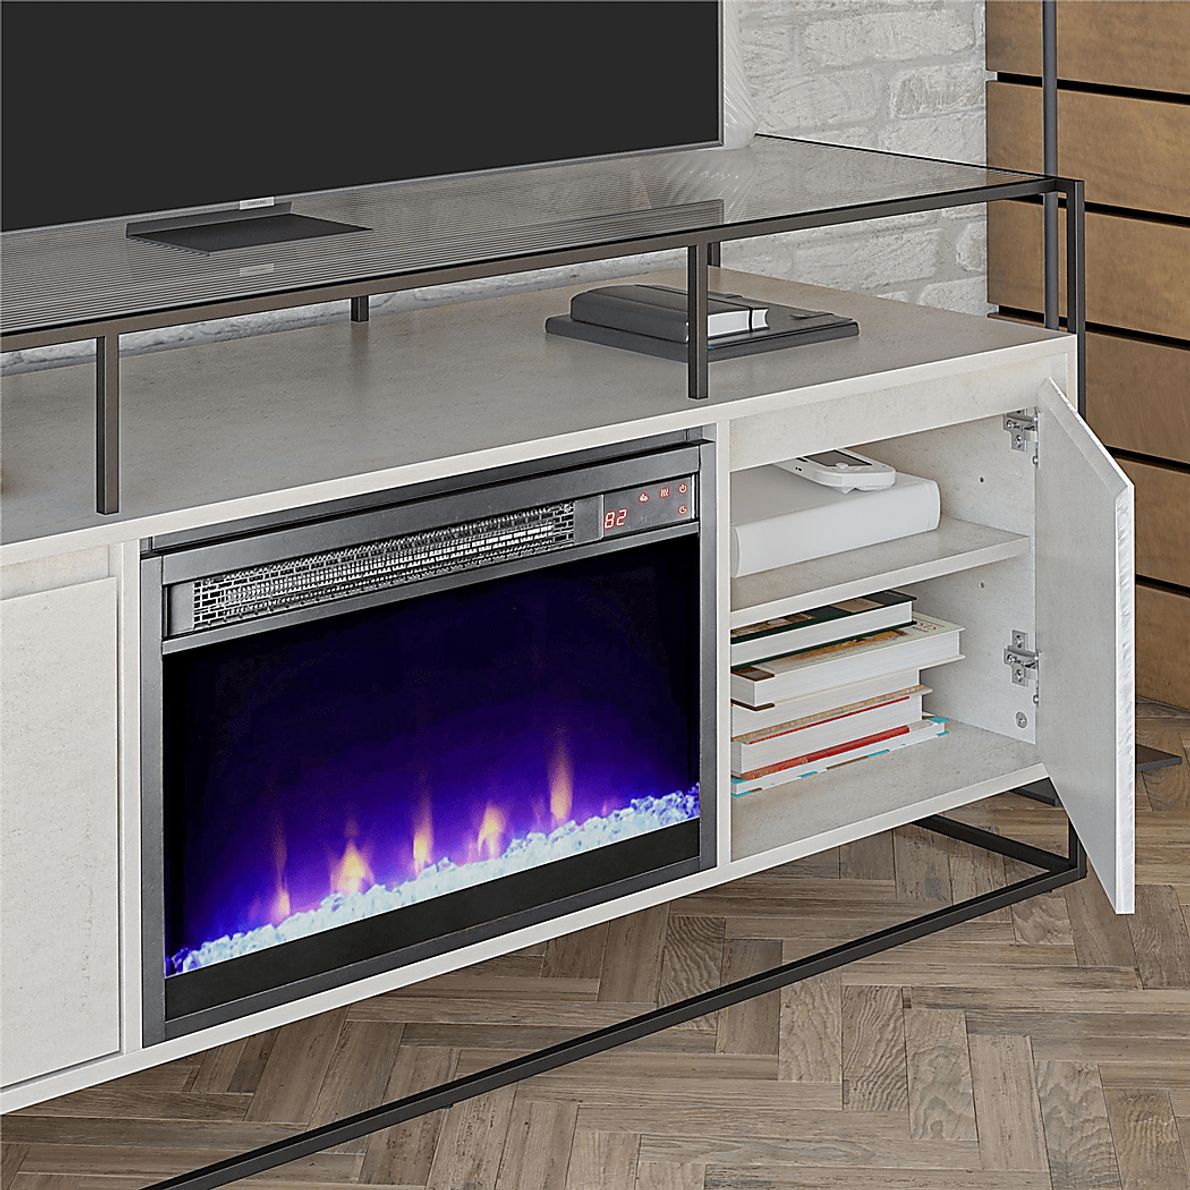 Carterette White 59 in. Console with Electric Fireplace